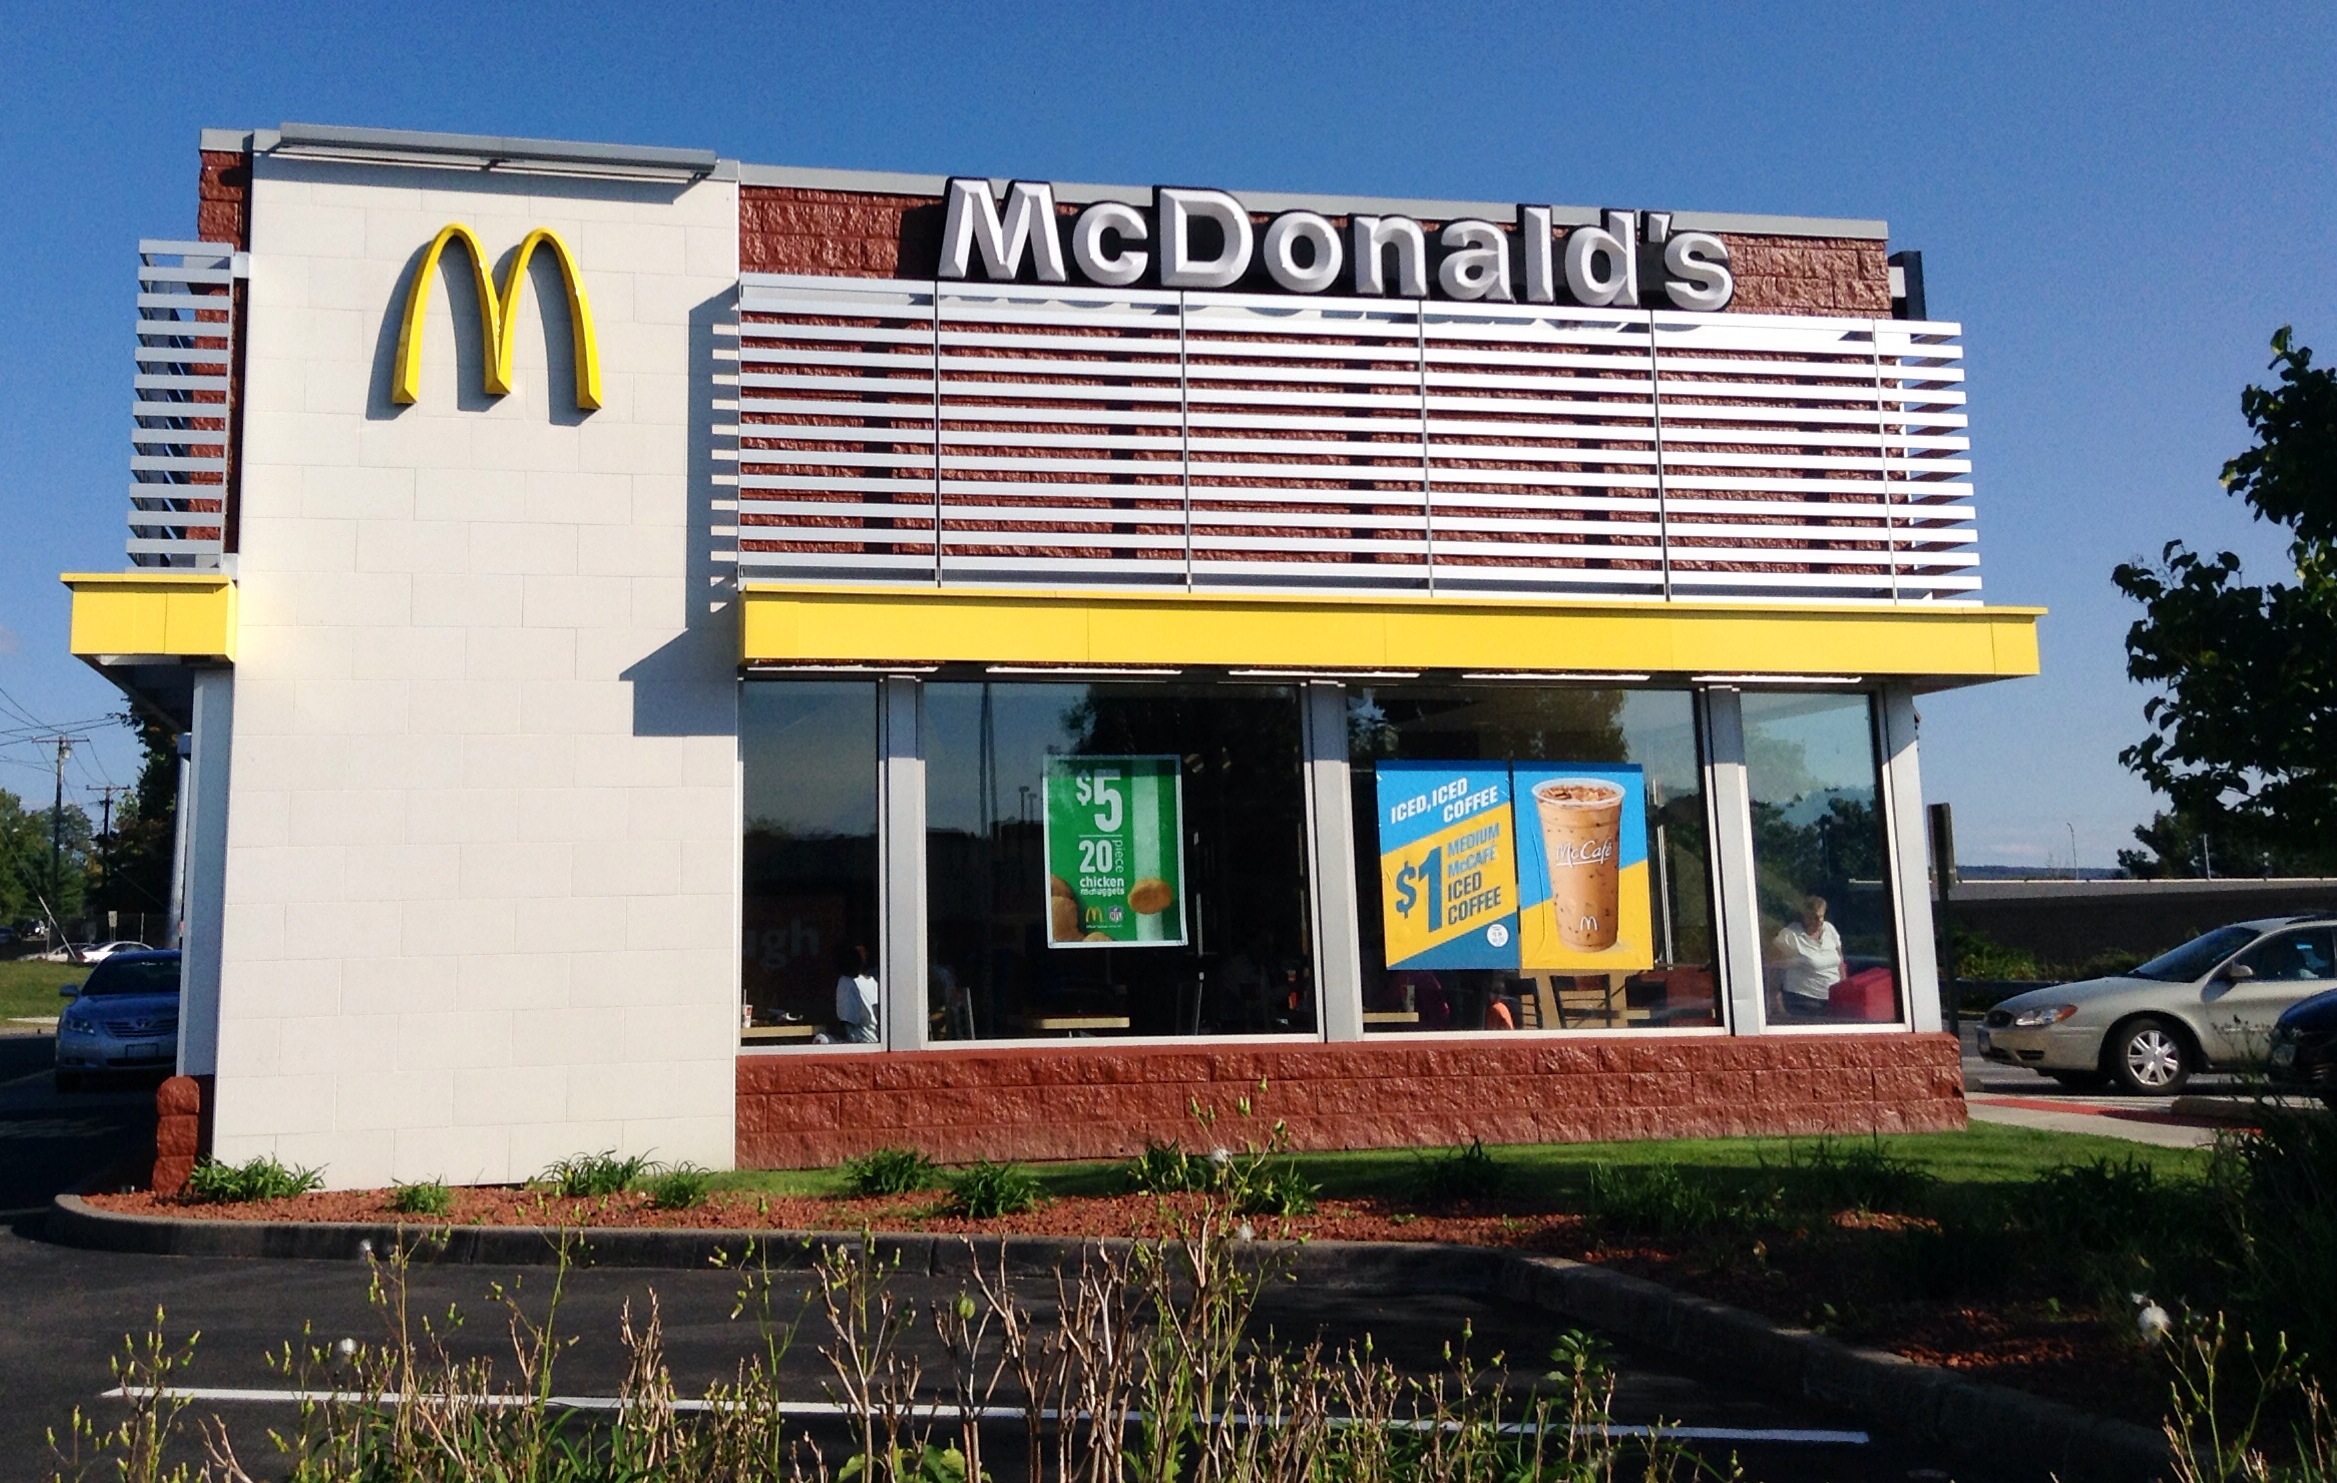 this mcdonald's is located on the corner of a parking lot